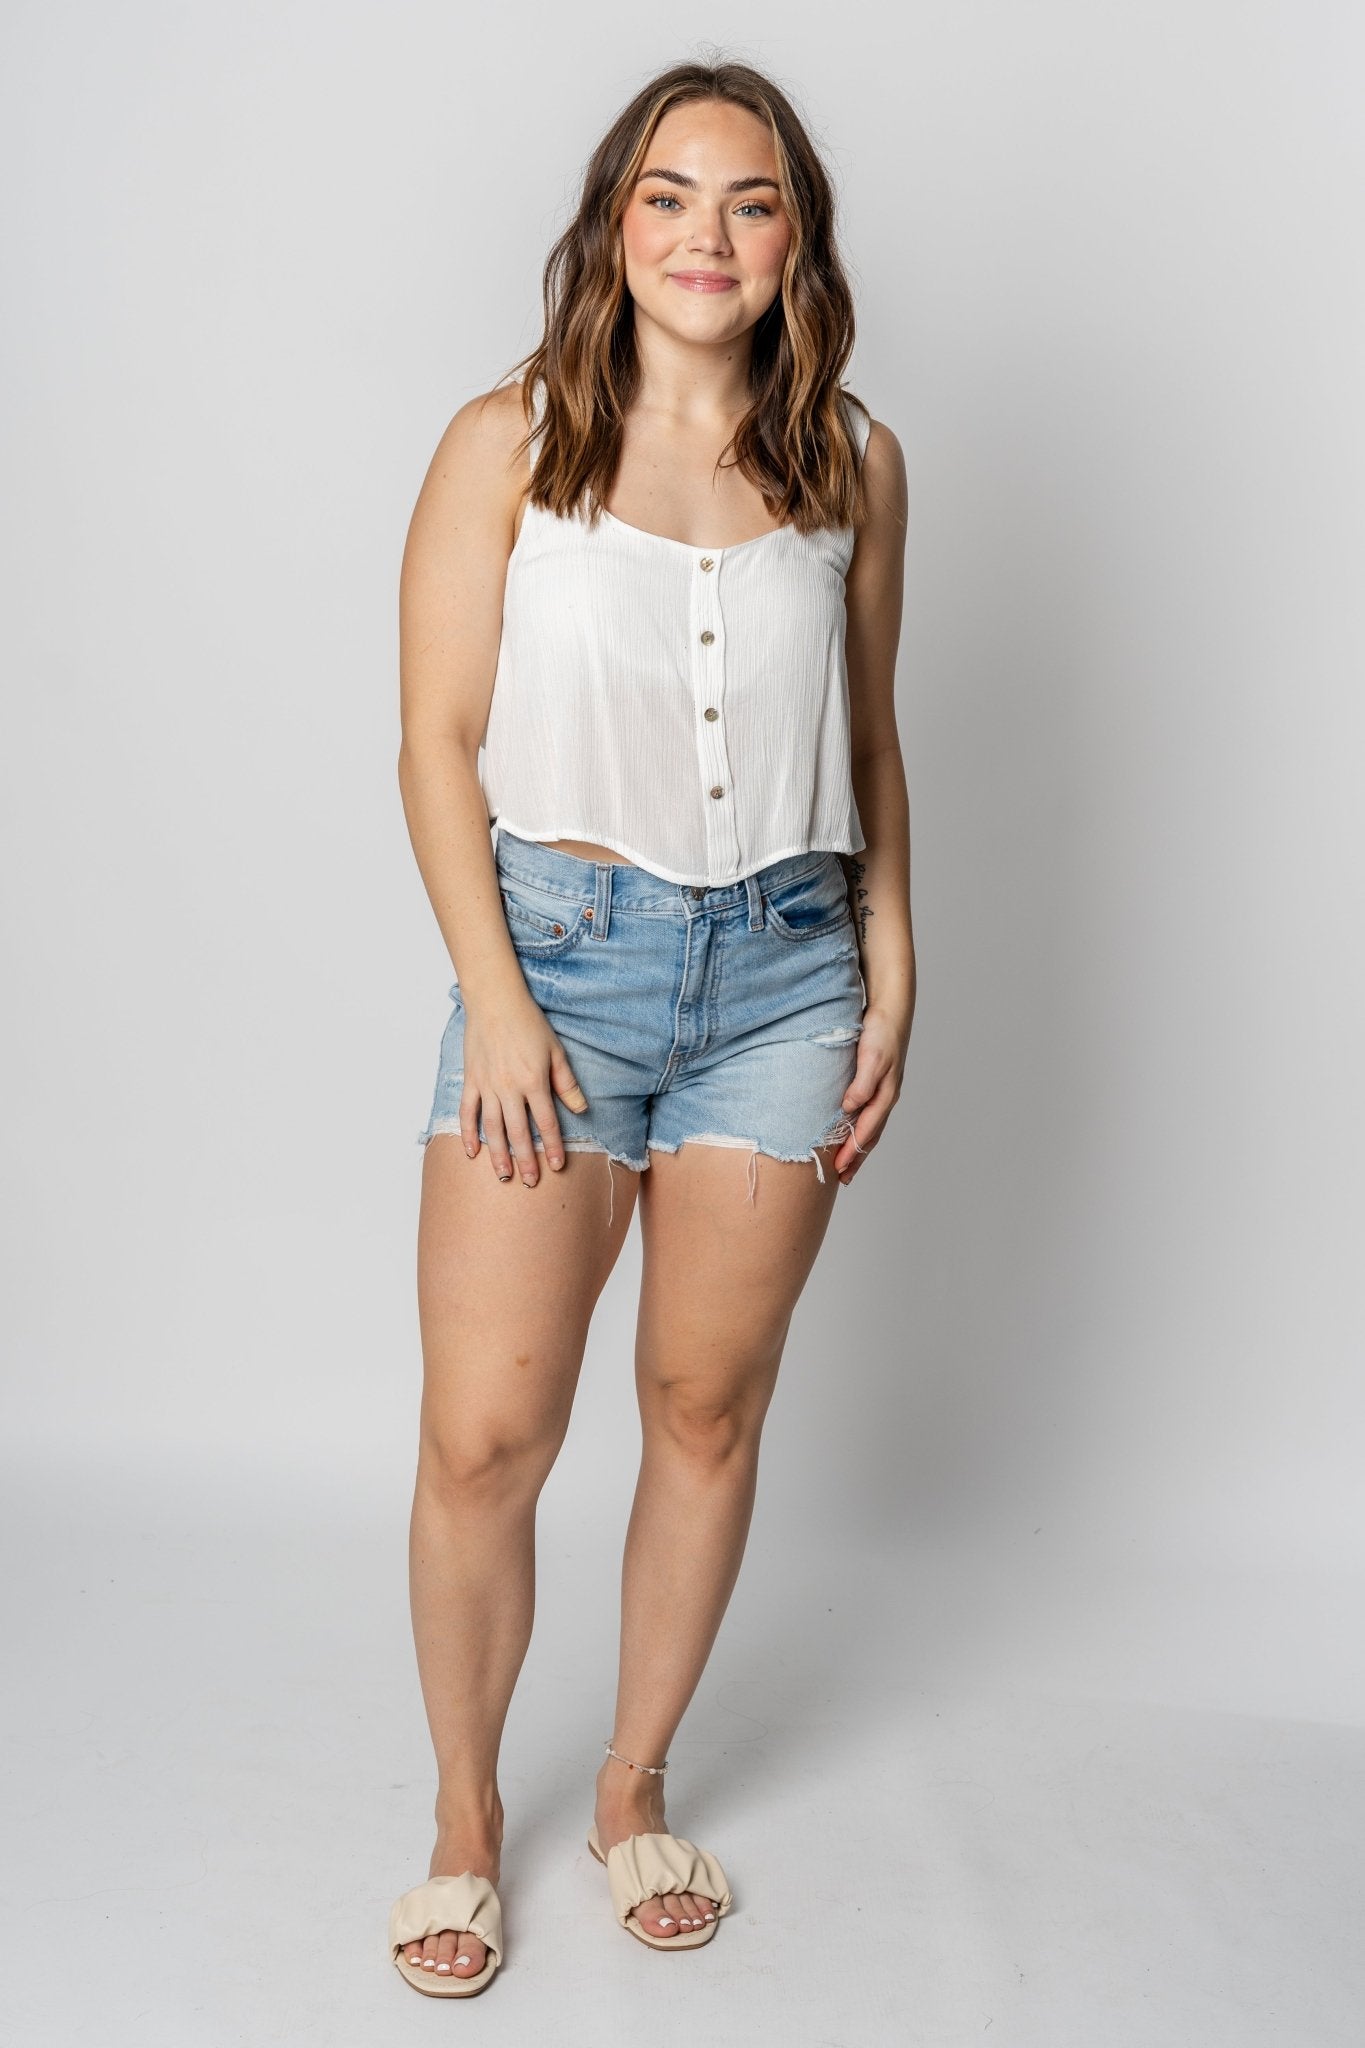 Cropped button tank top ivory - Trendy Top - Fashion Tank Tops at Lush Fashion Lounge Boutique in Oklahoma City